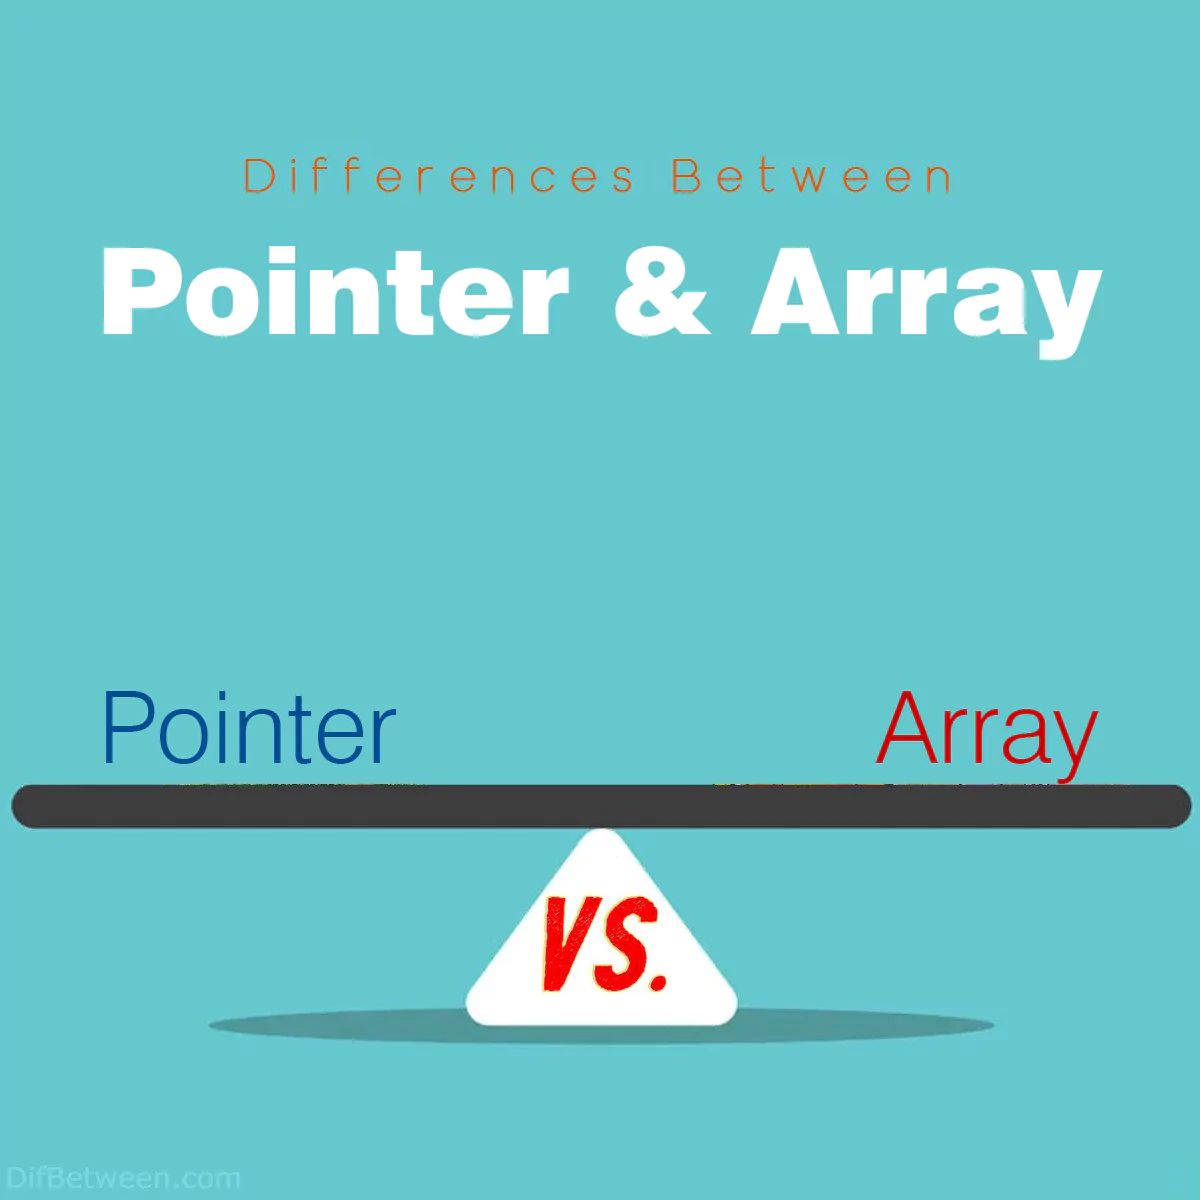 Differences Between Pointer and Array